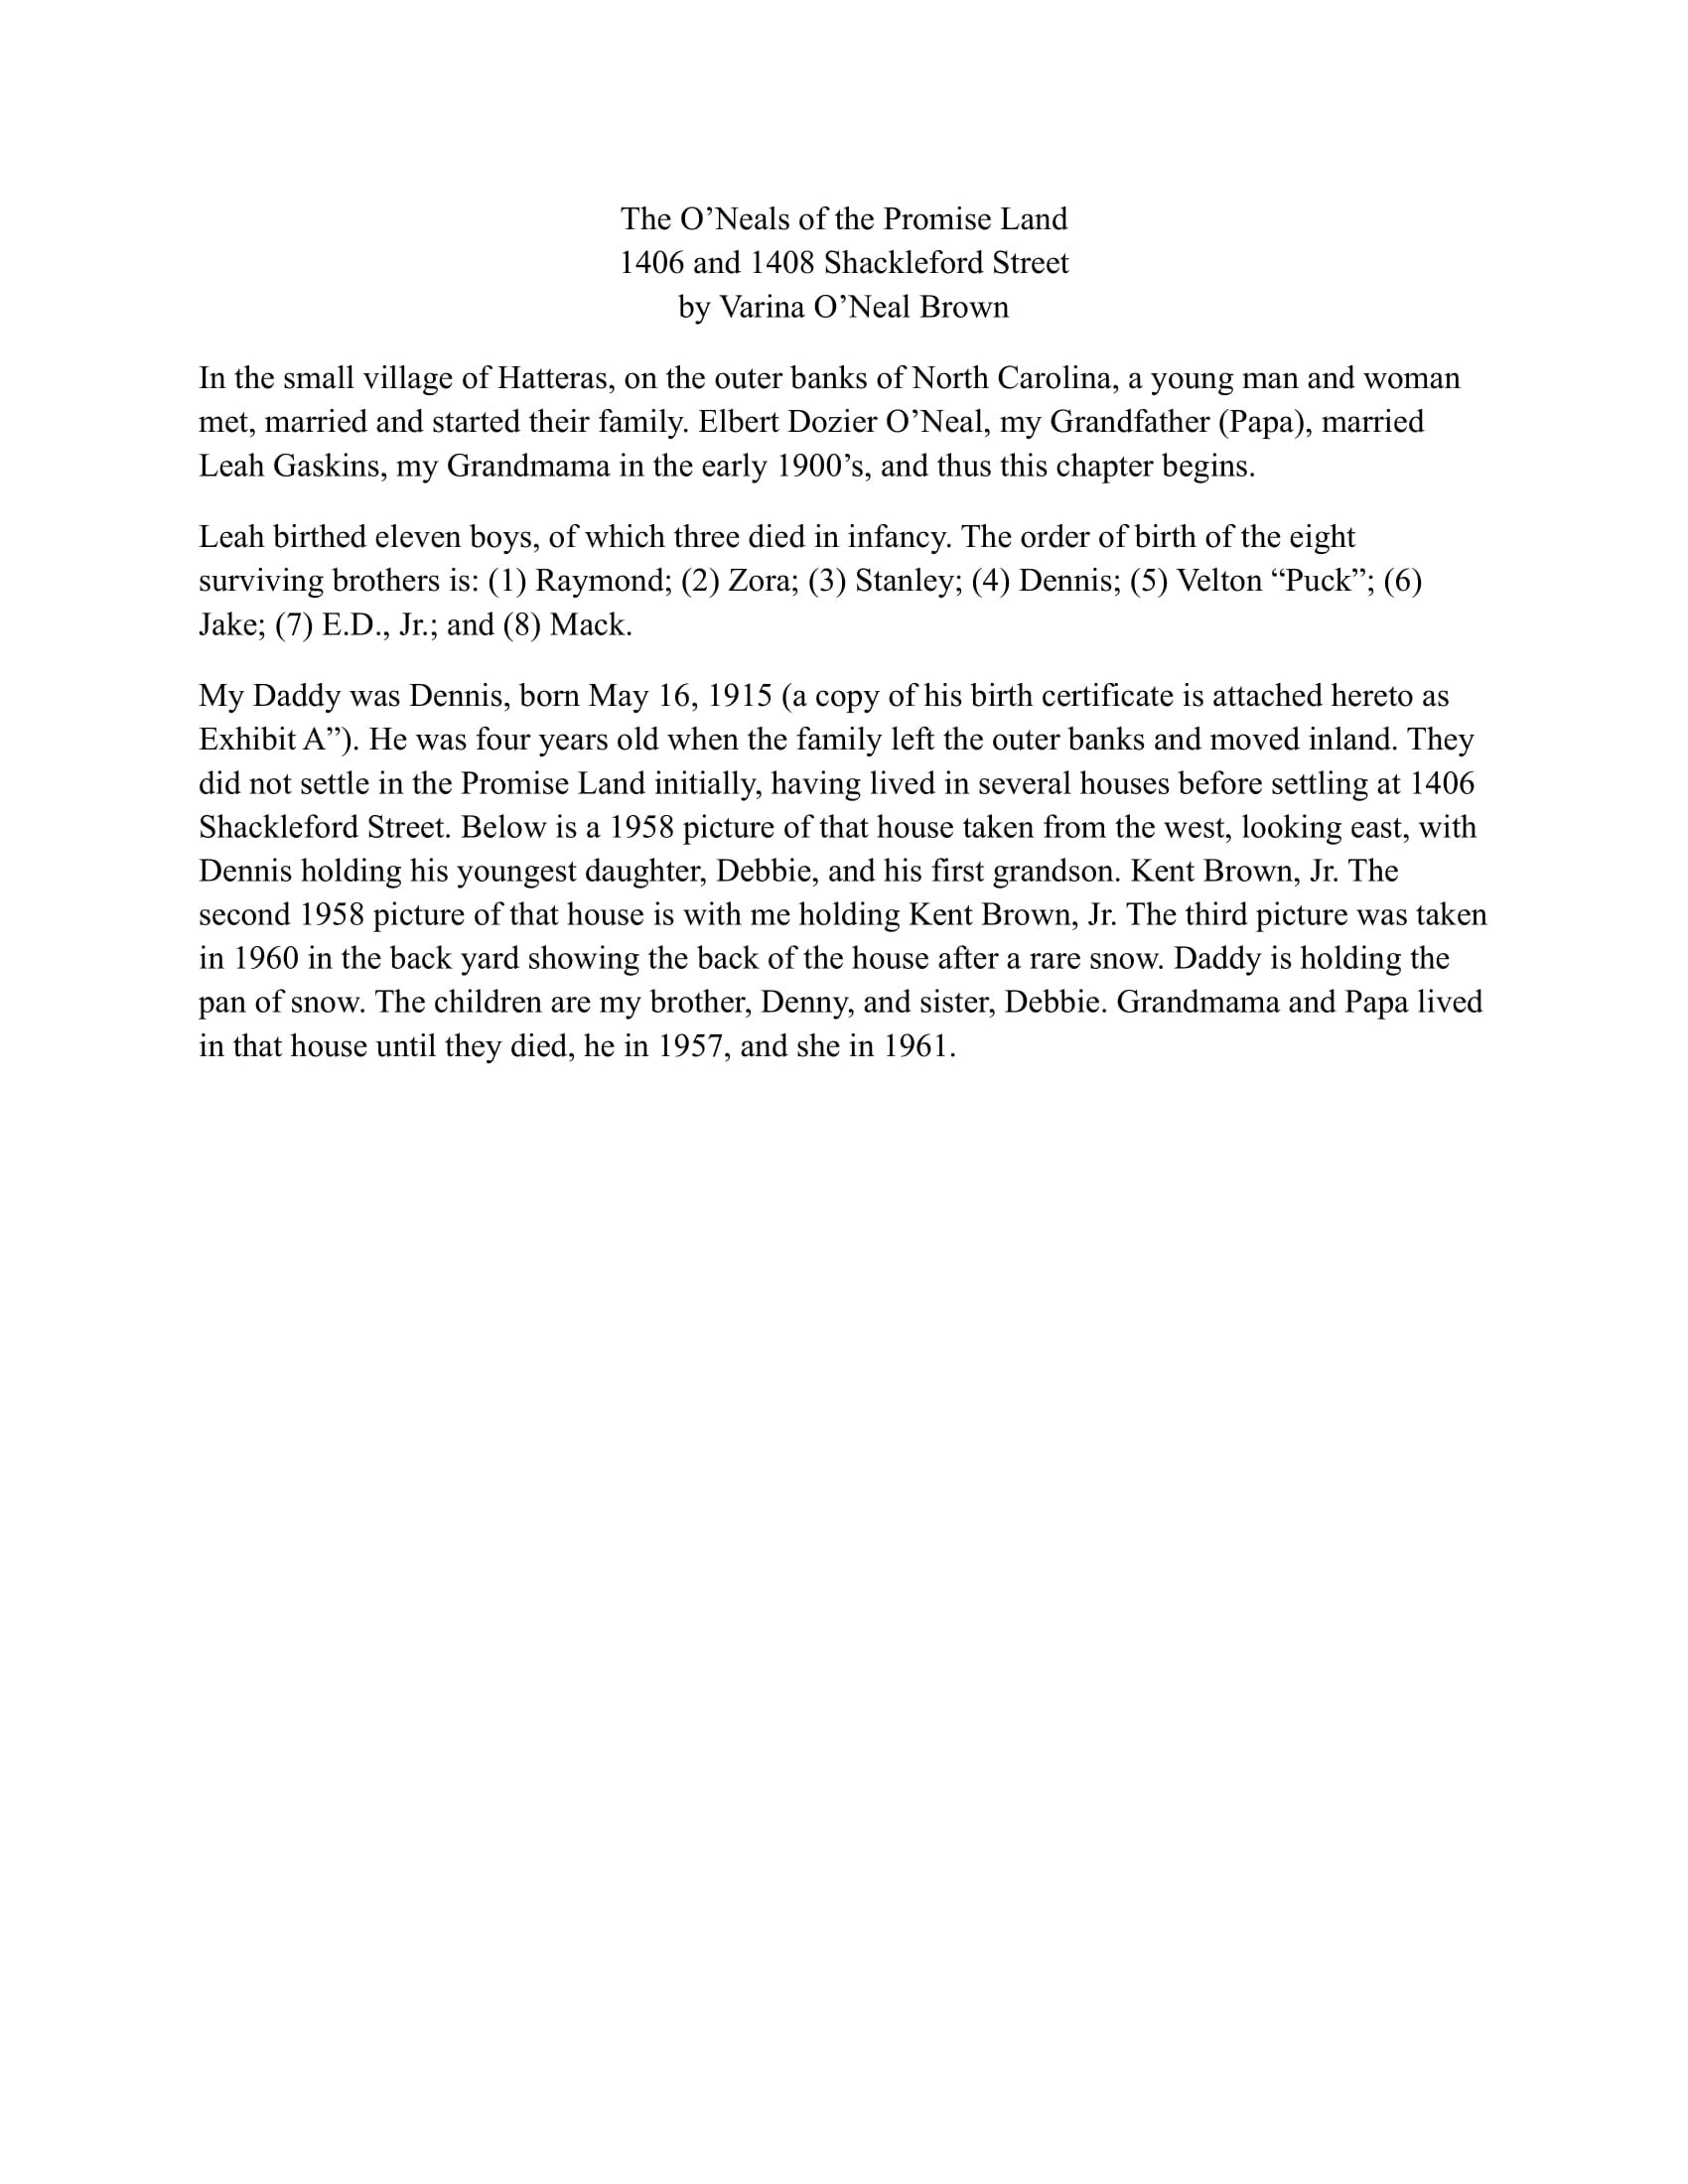 The O’Neals of the Promise Land by Varina O'Neal Brown.docx-01.jpg